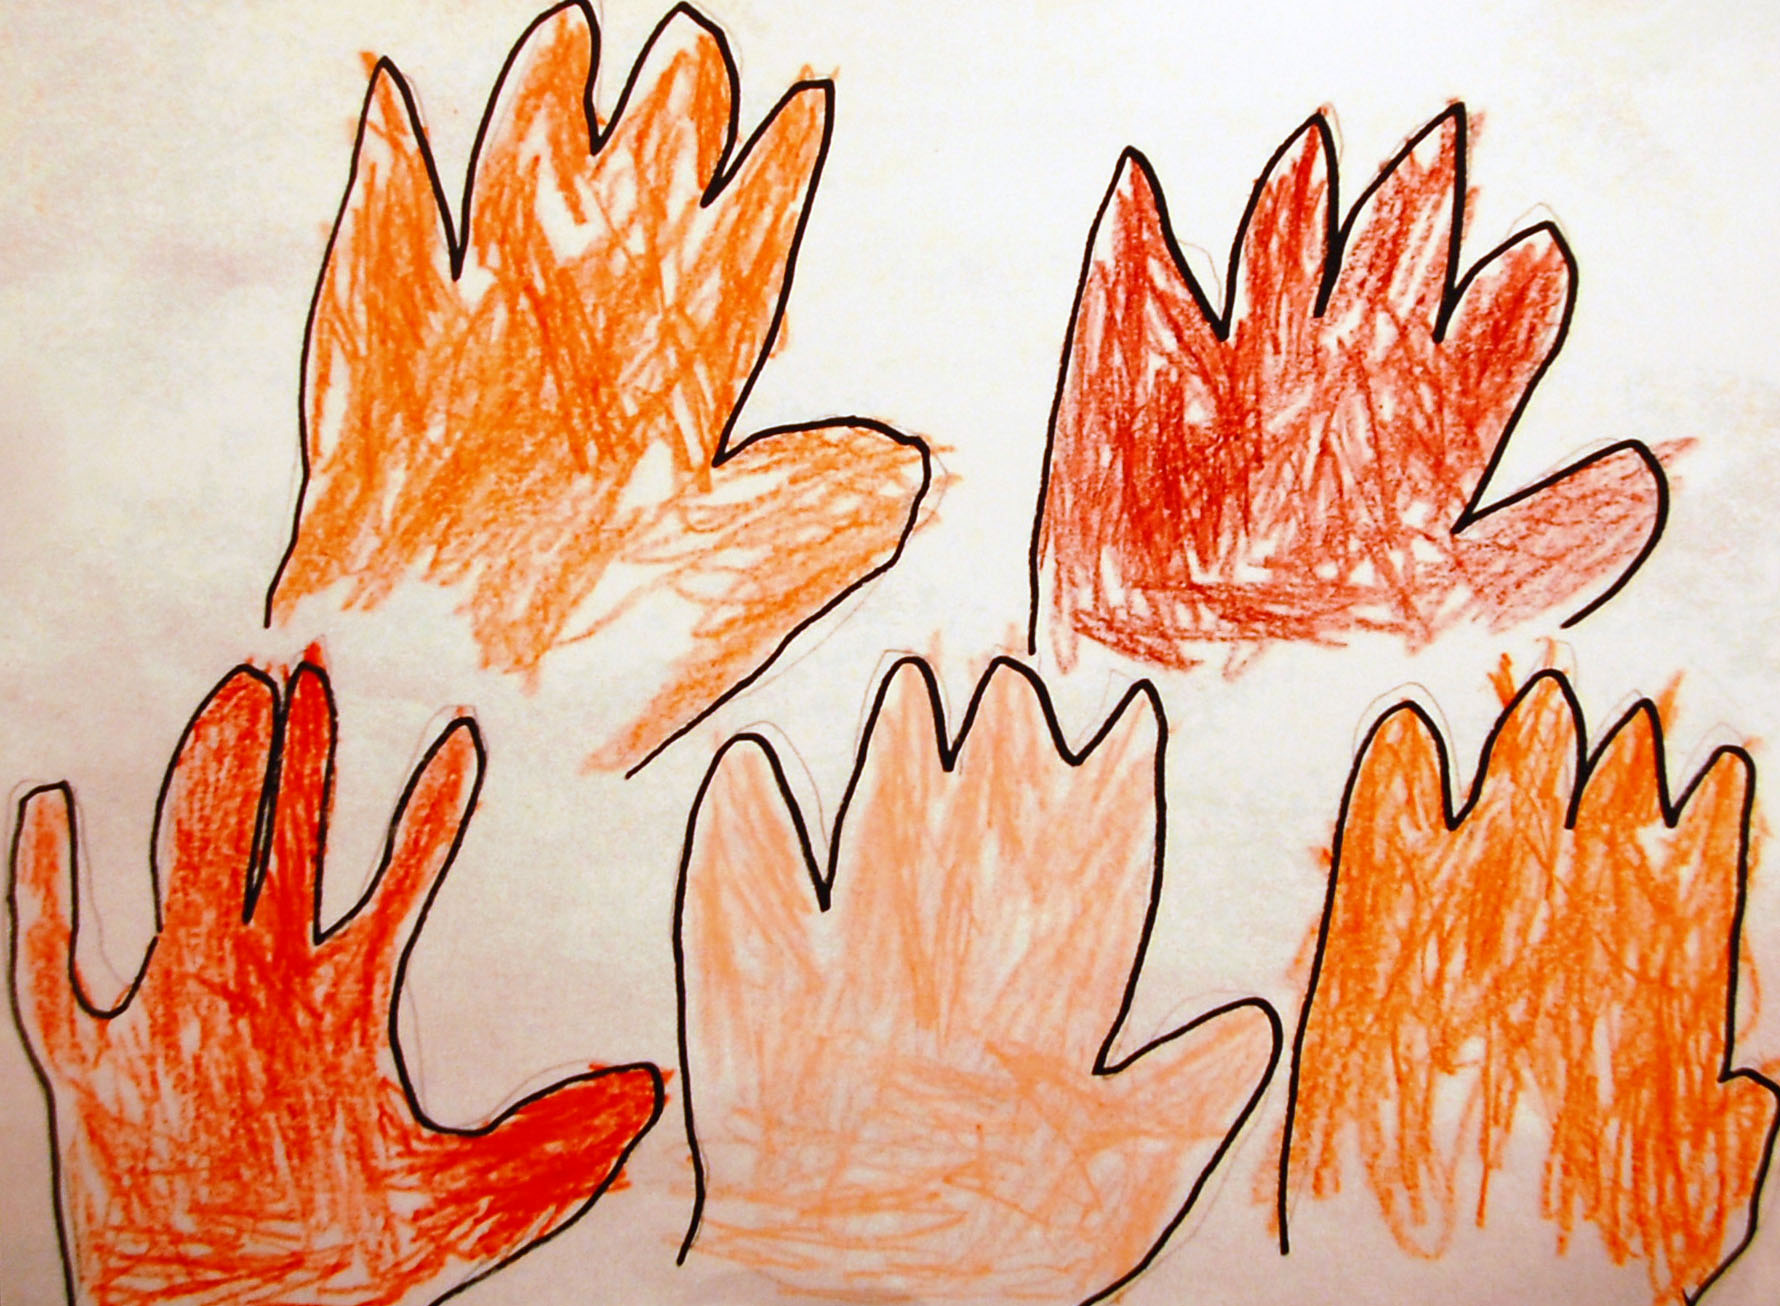 Child's crayon drawing of hands